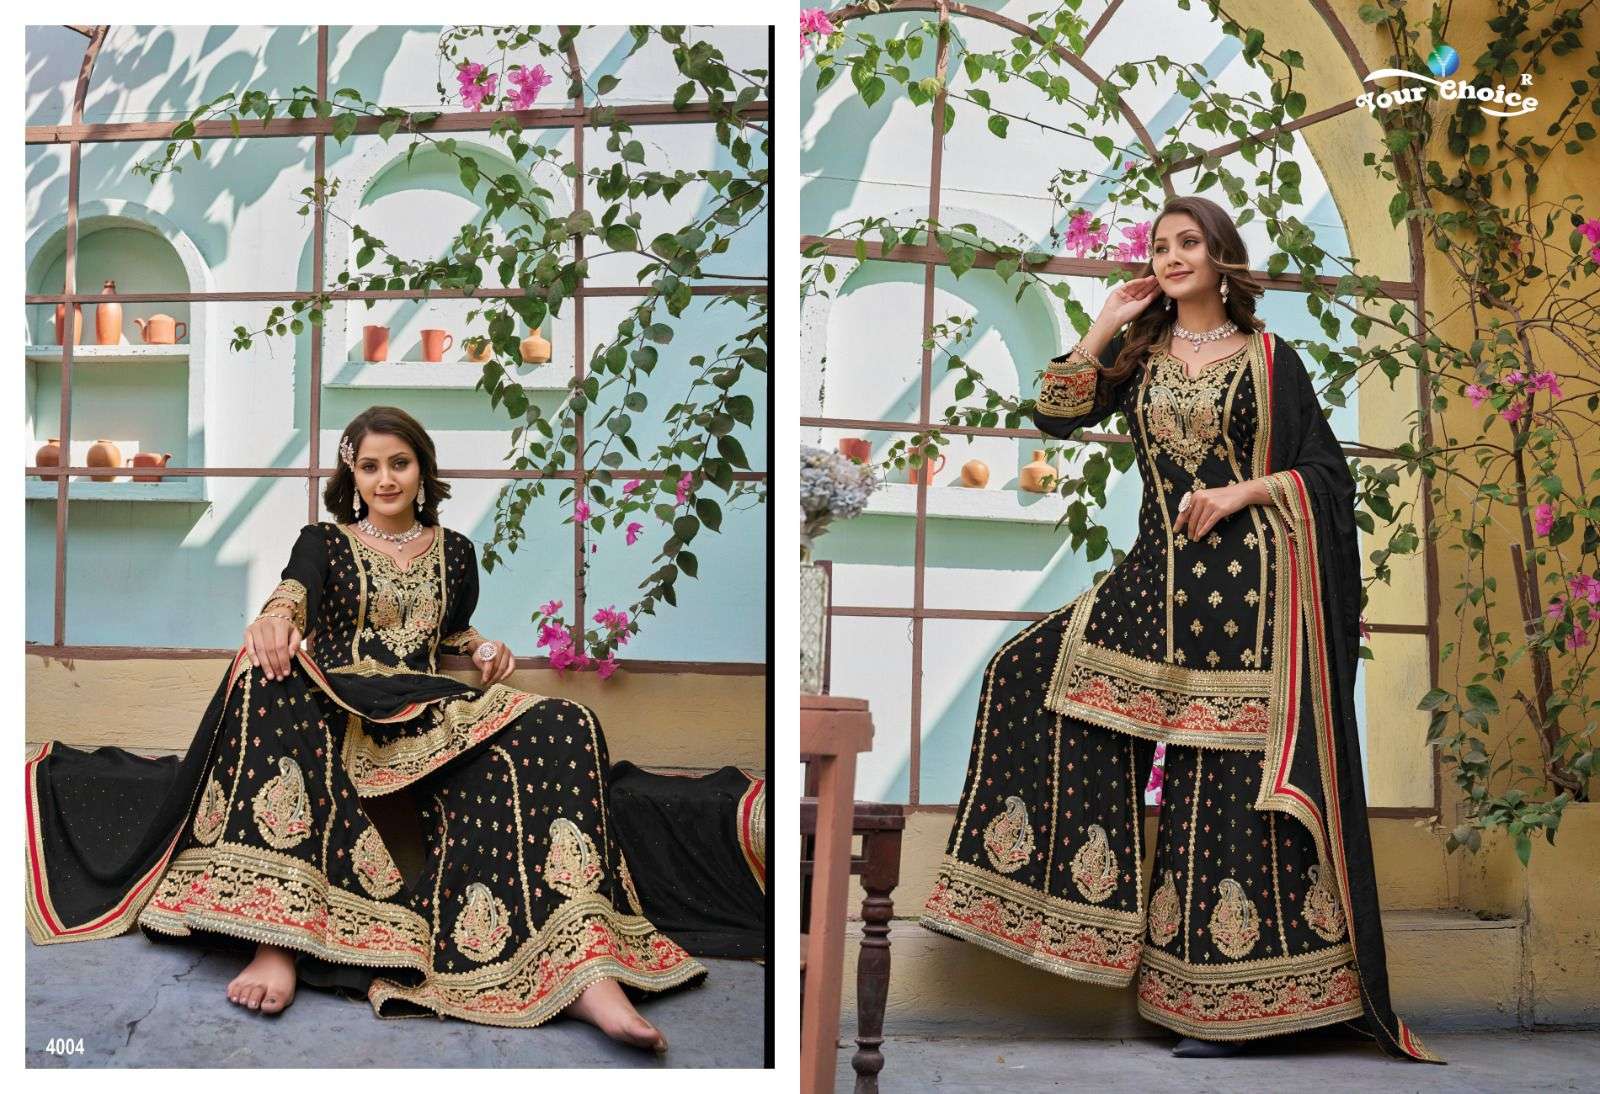 OLIVE BUY YOUR CHOICE DESIGNER LATEST WHOLESALE ONLINE LOWEST PRICE CHINON SALWAR SUIT SETS